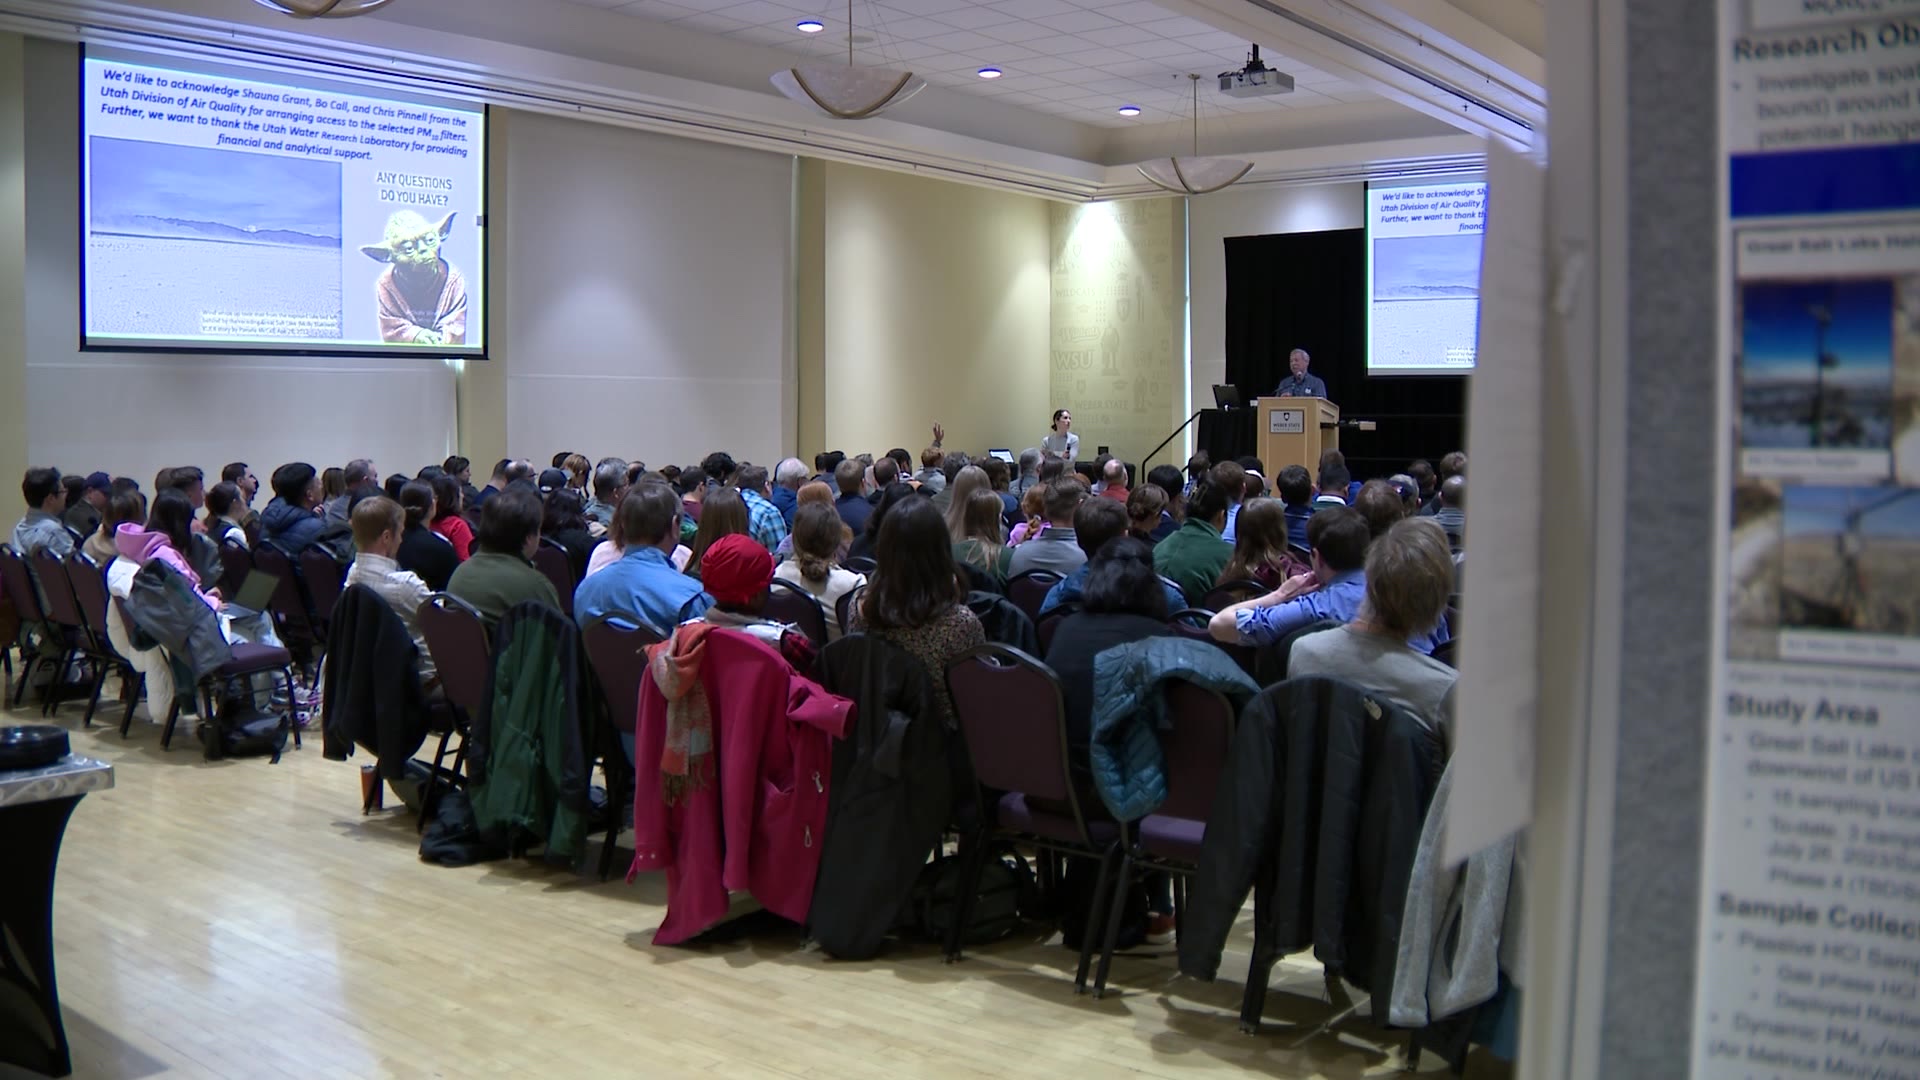 Researchers gathered in a Weber State University room for a Air Quality Summit....